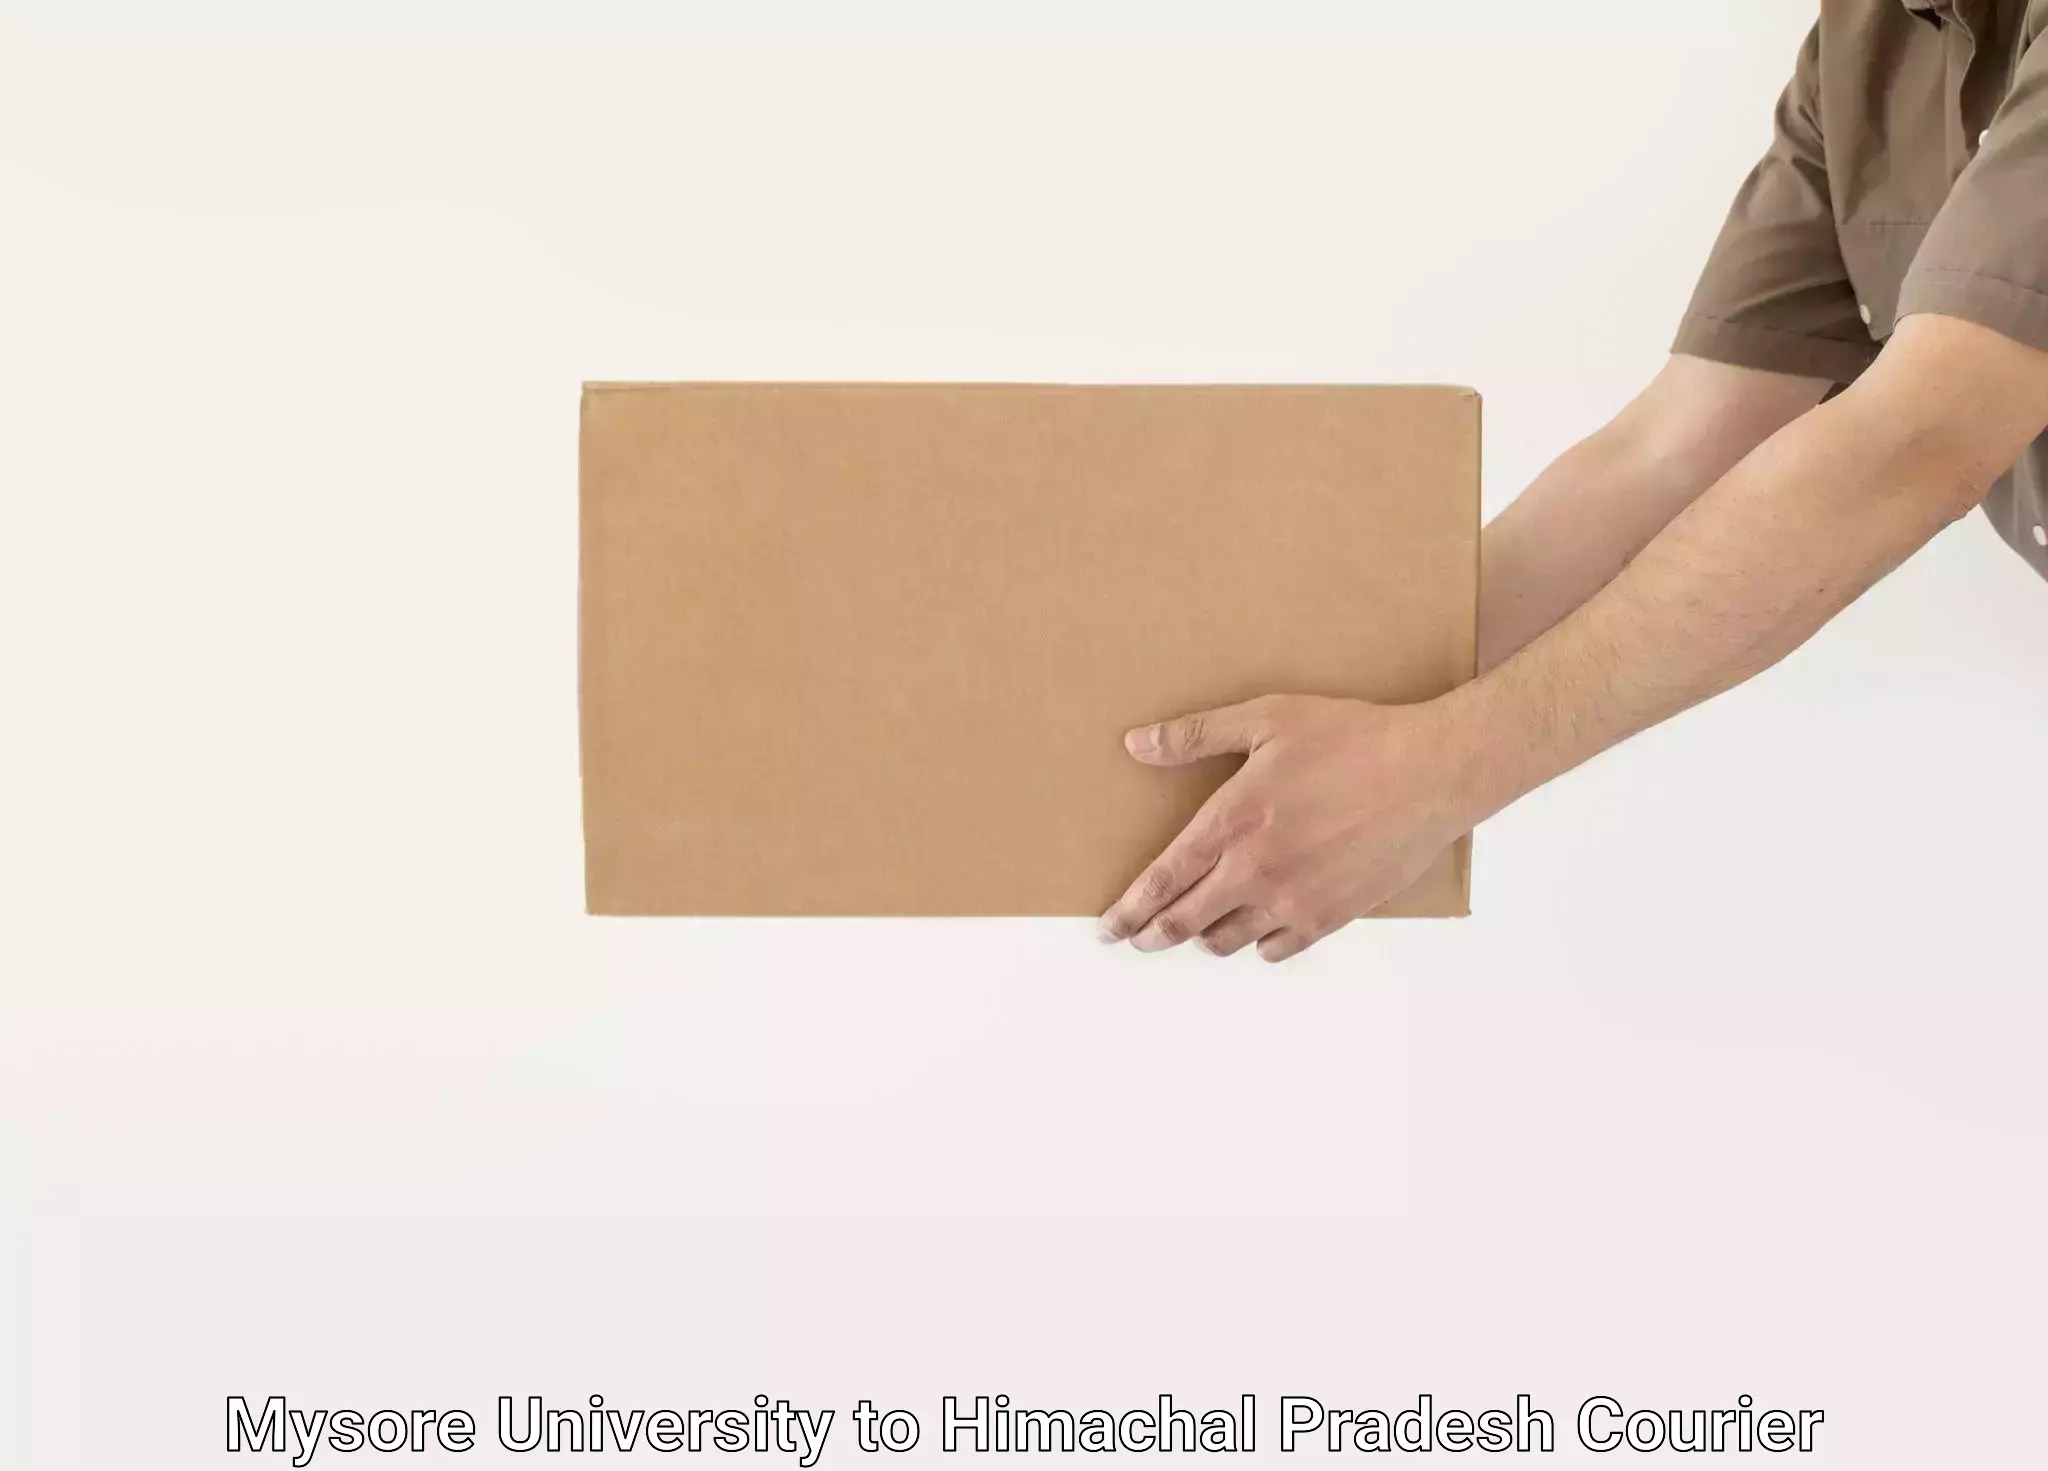 Professional movers and packers Mysore University to Dheera